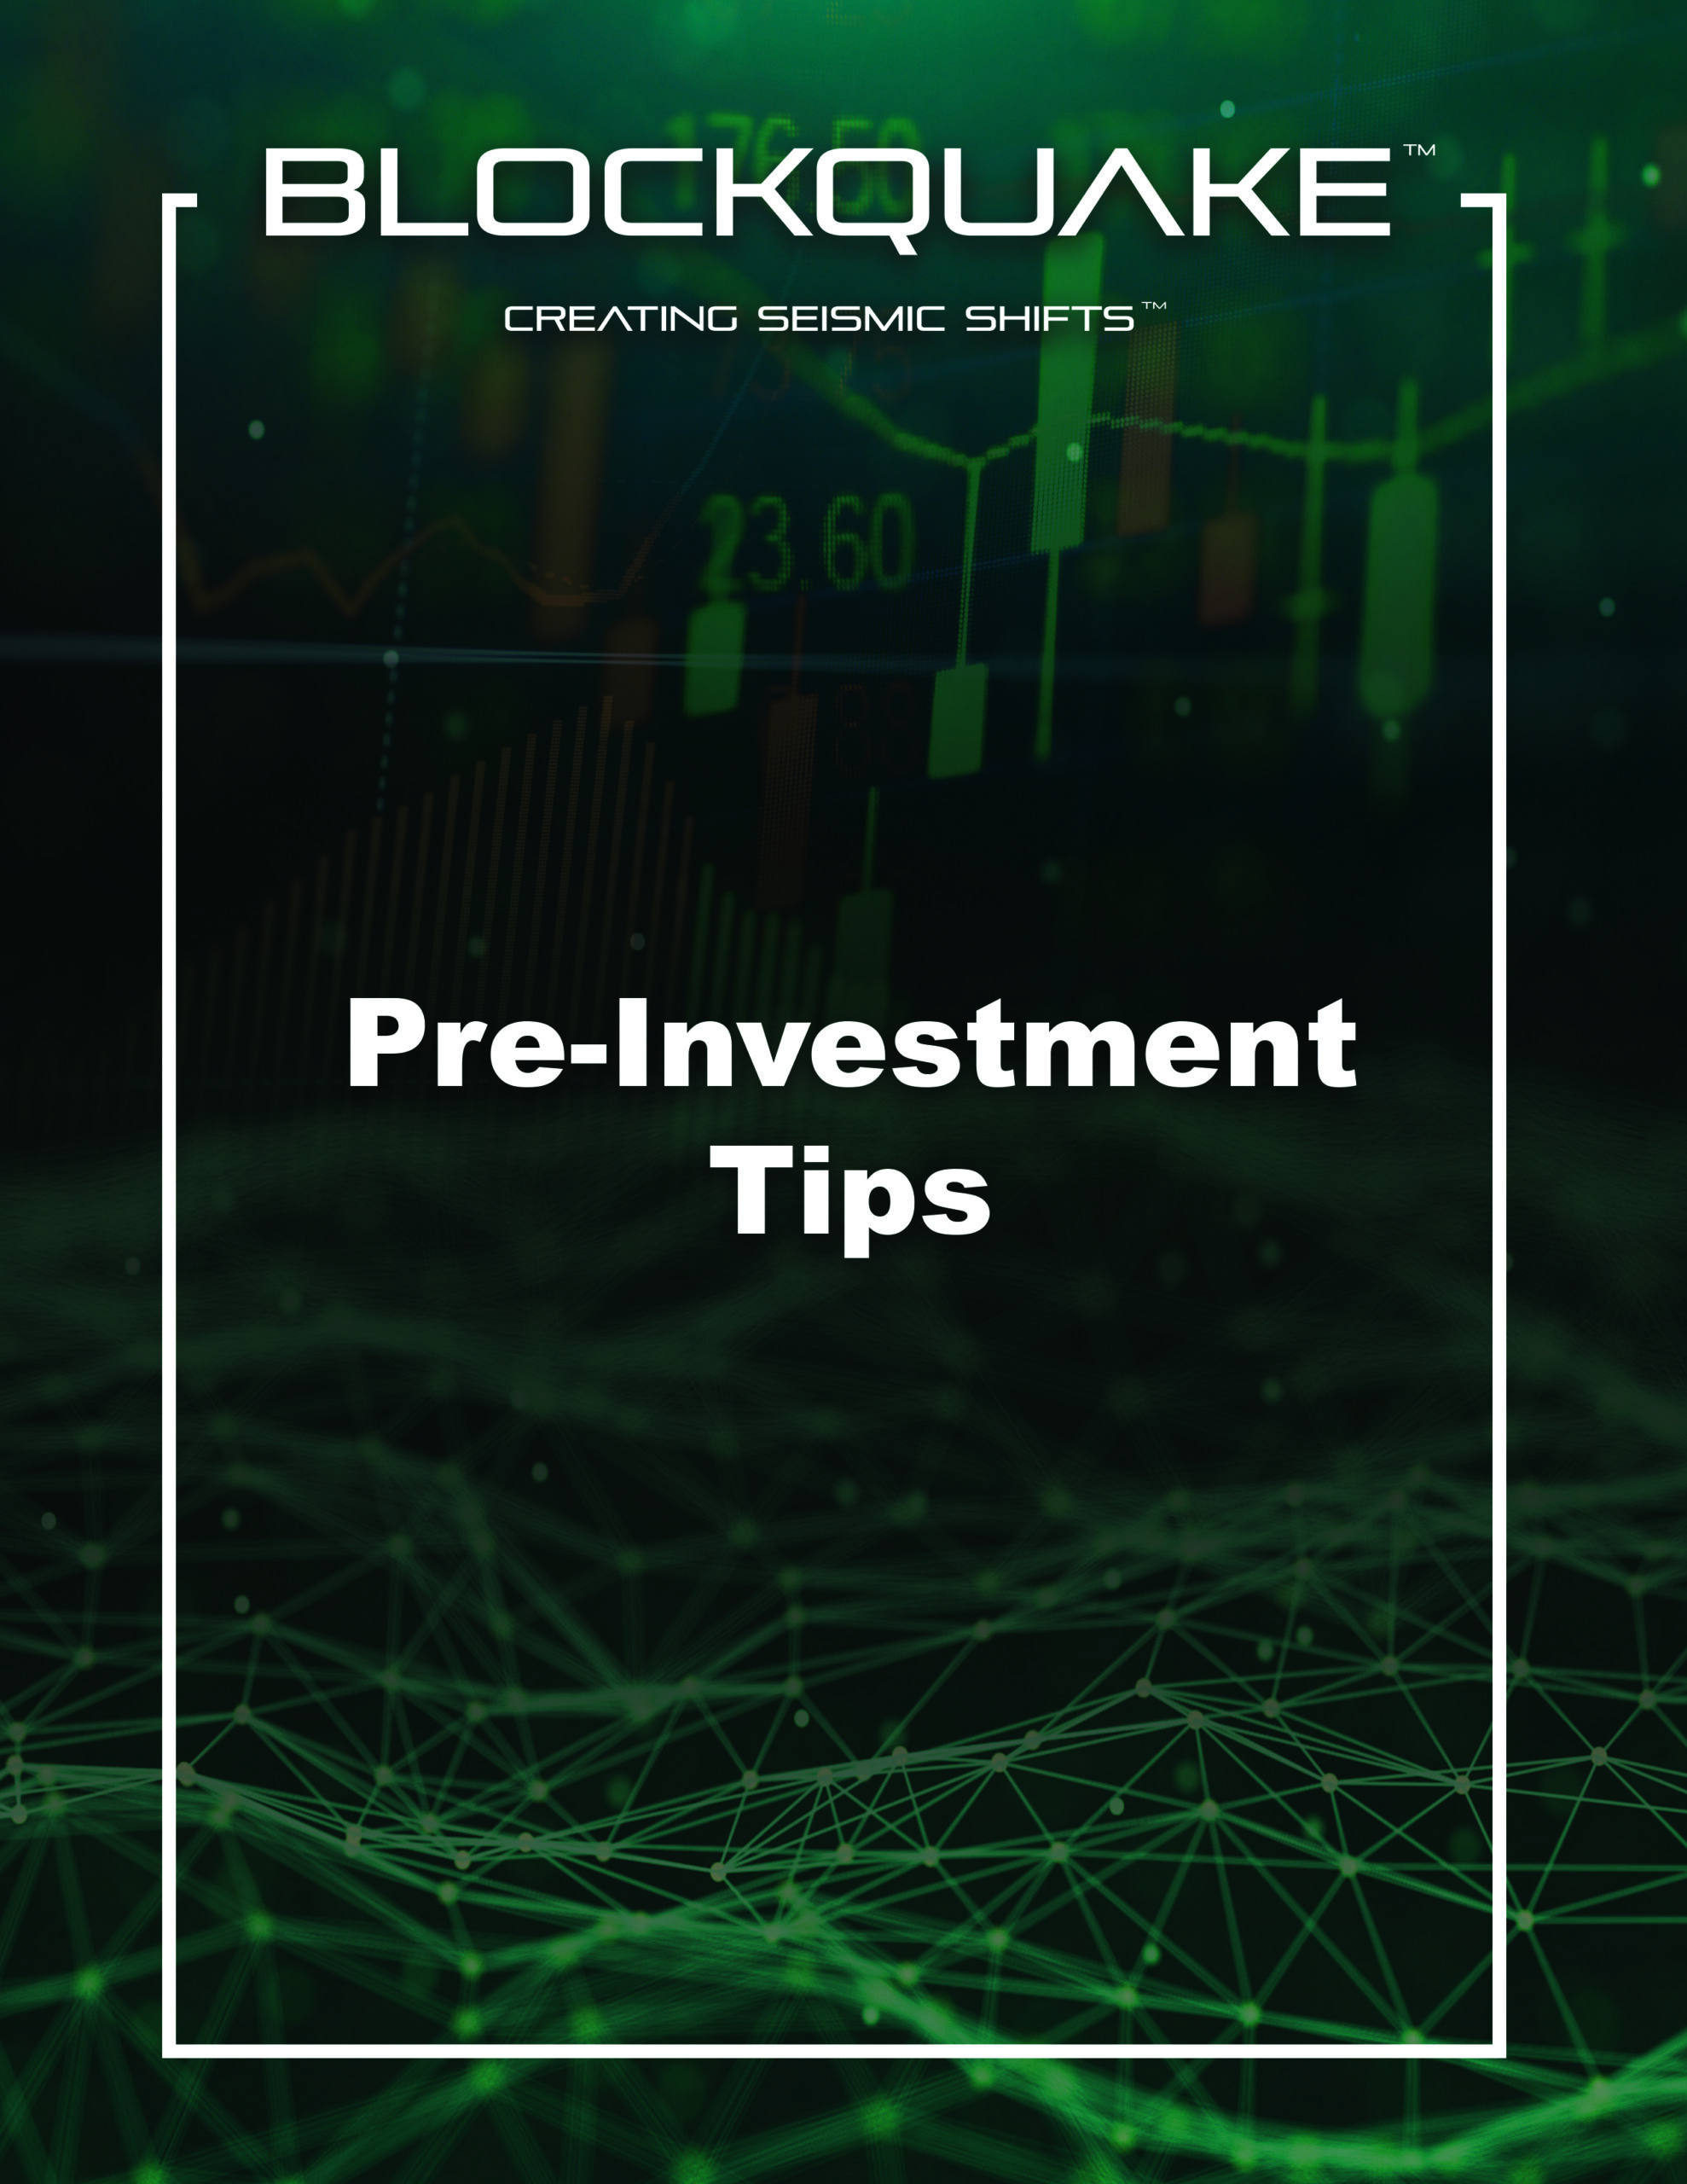 6 Pre-Investment Tips for Crypto from BlockQuake